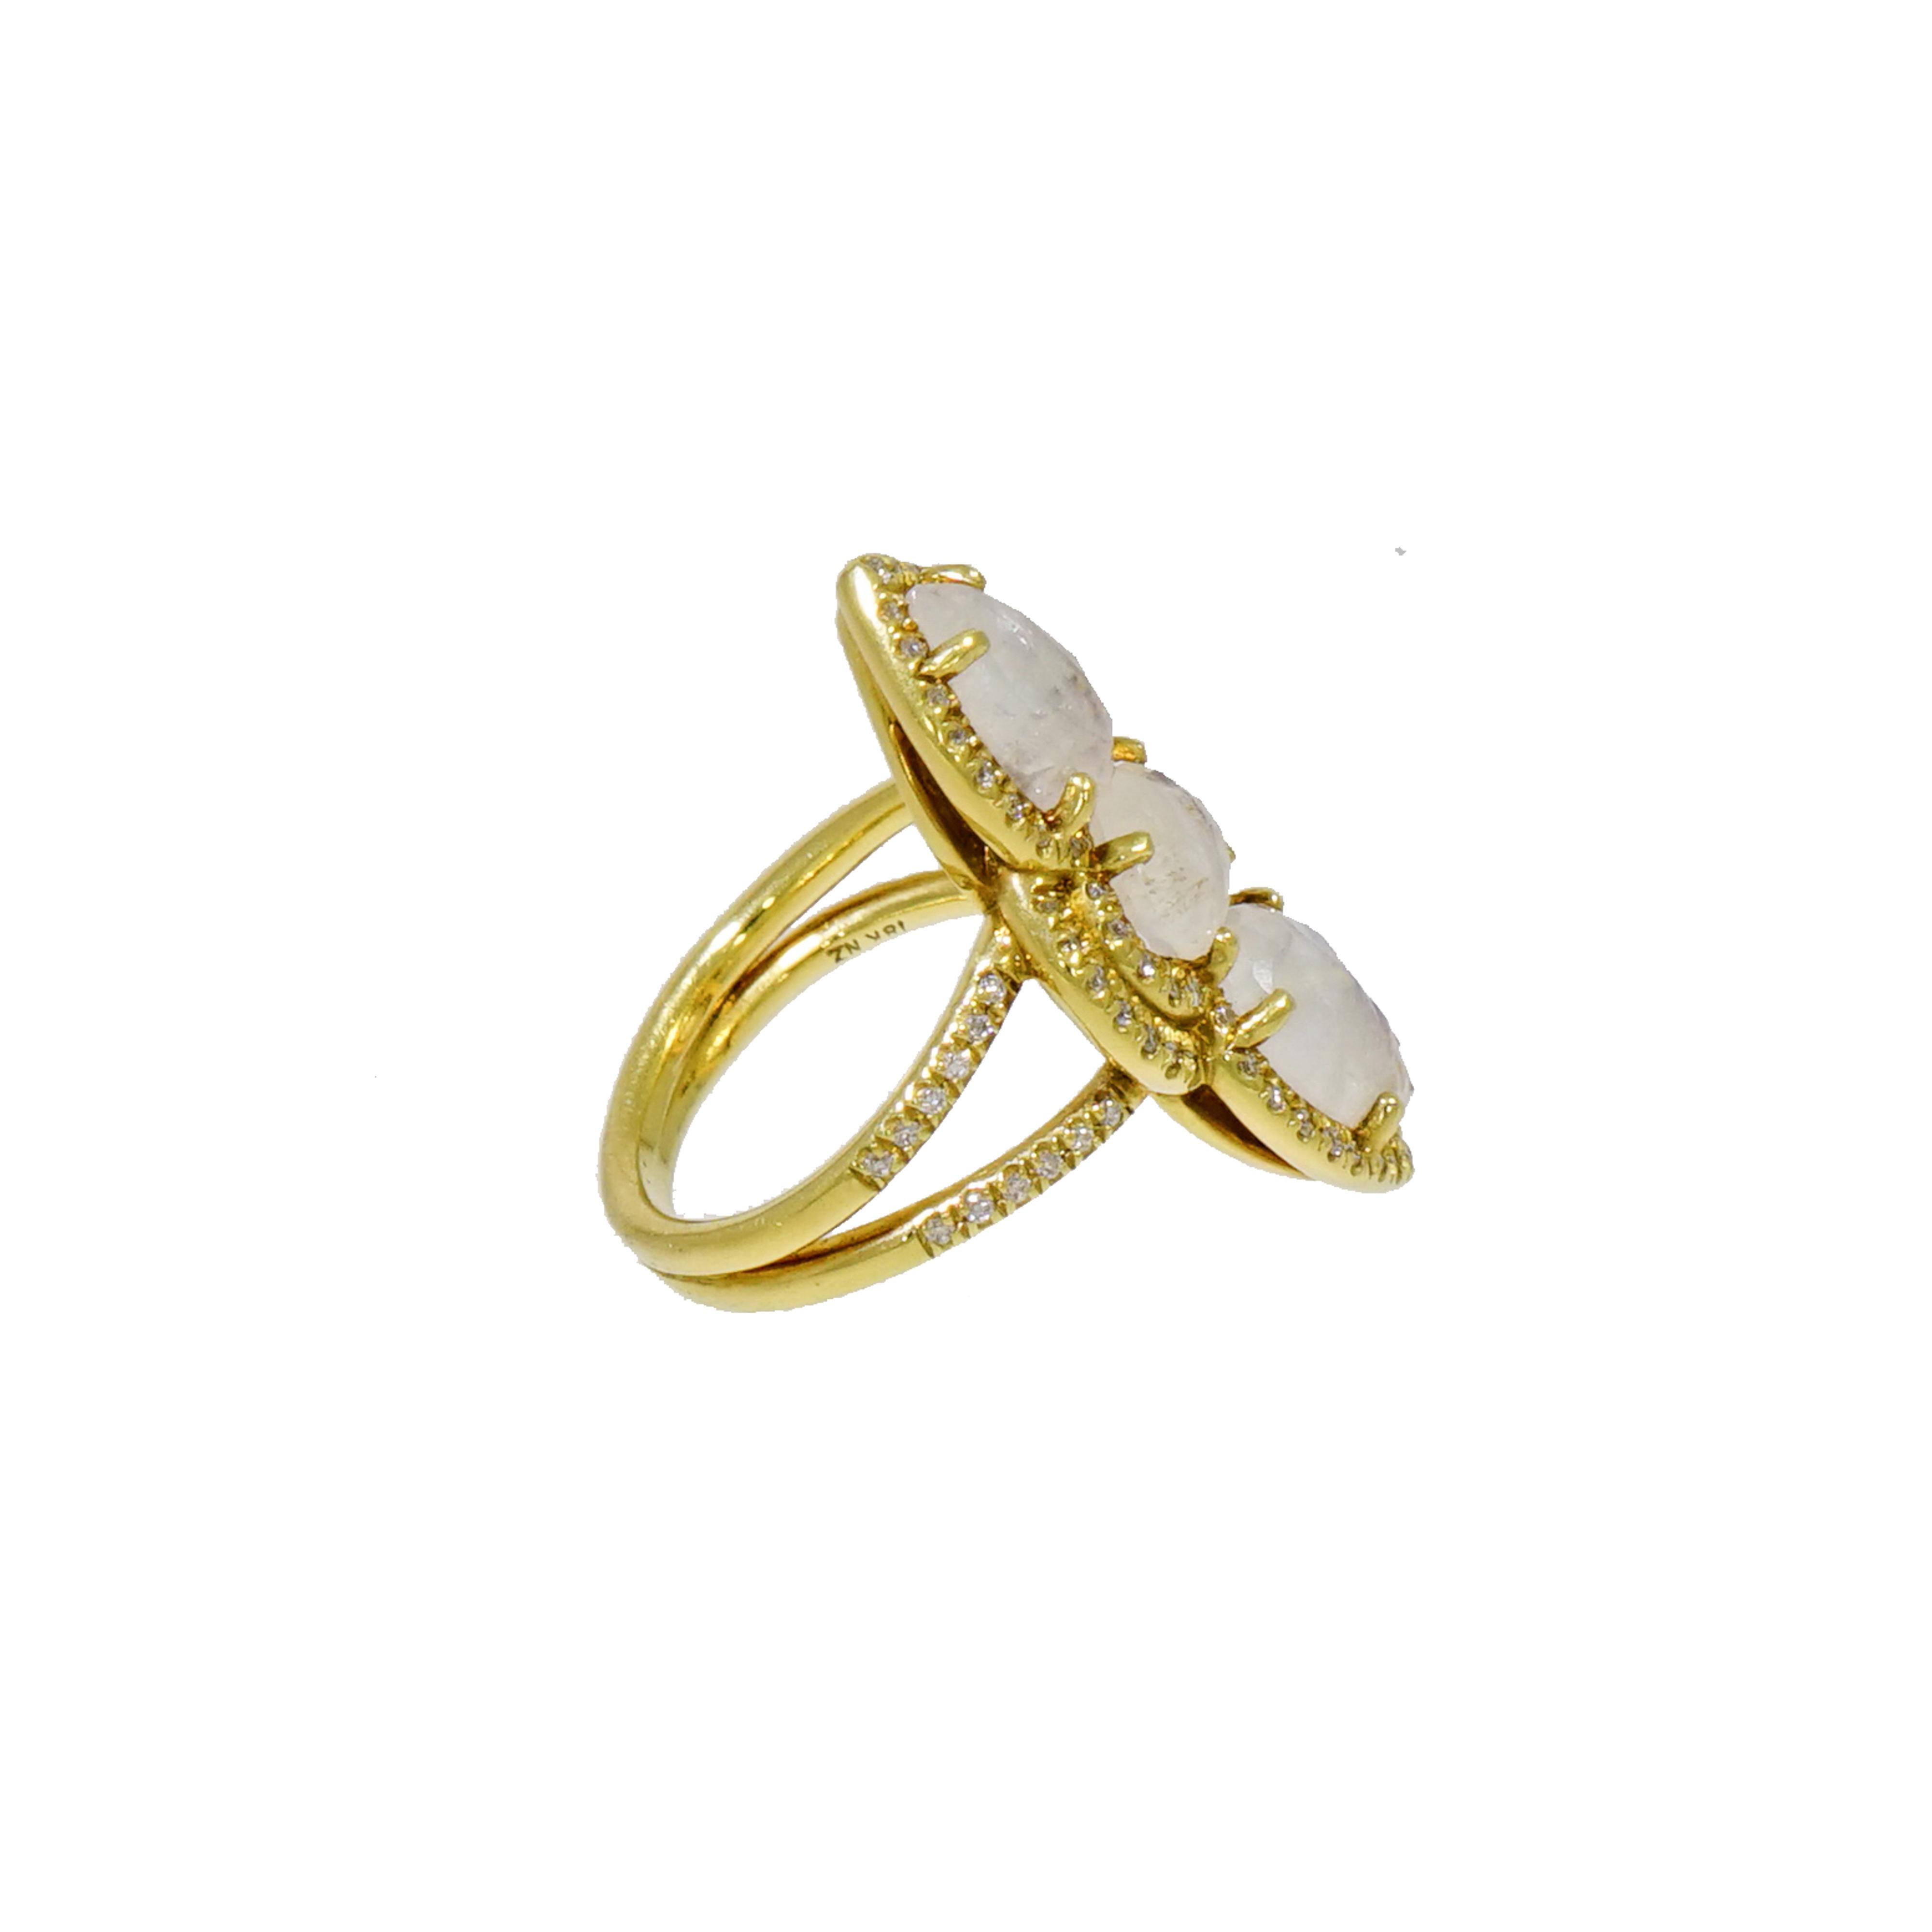 From the lower key to the extravagant...This Moonstone Ring is so much more: a dreamy bundle of Moonstone and Diamonds. Designed and crafted in NYC in 18k yellow gold with faceted pear and oval shaped moonstones displaying colors and illuminated by